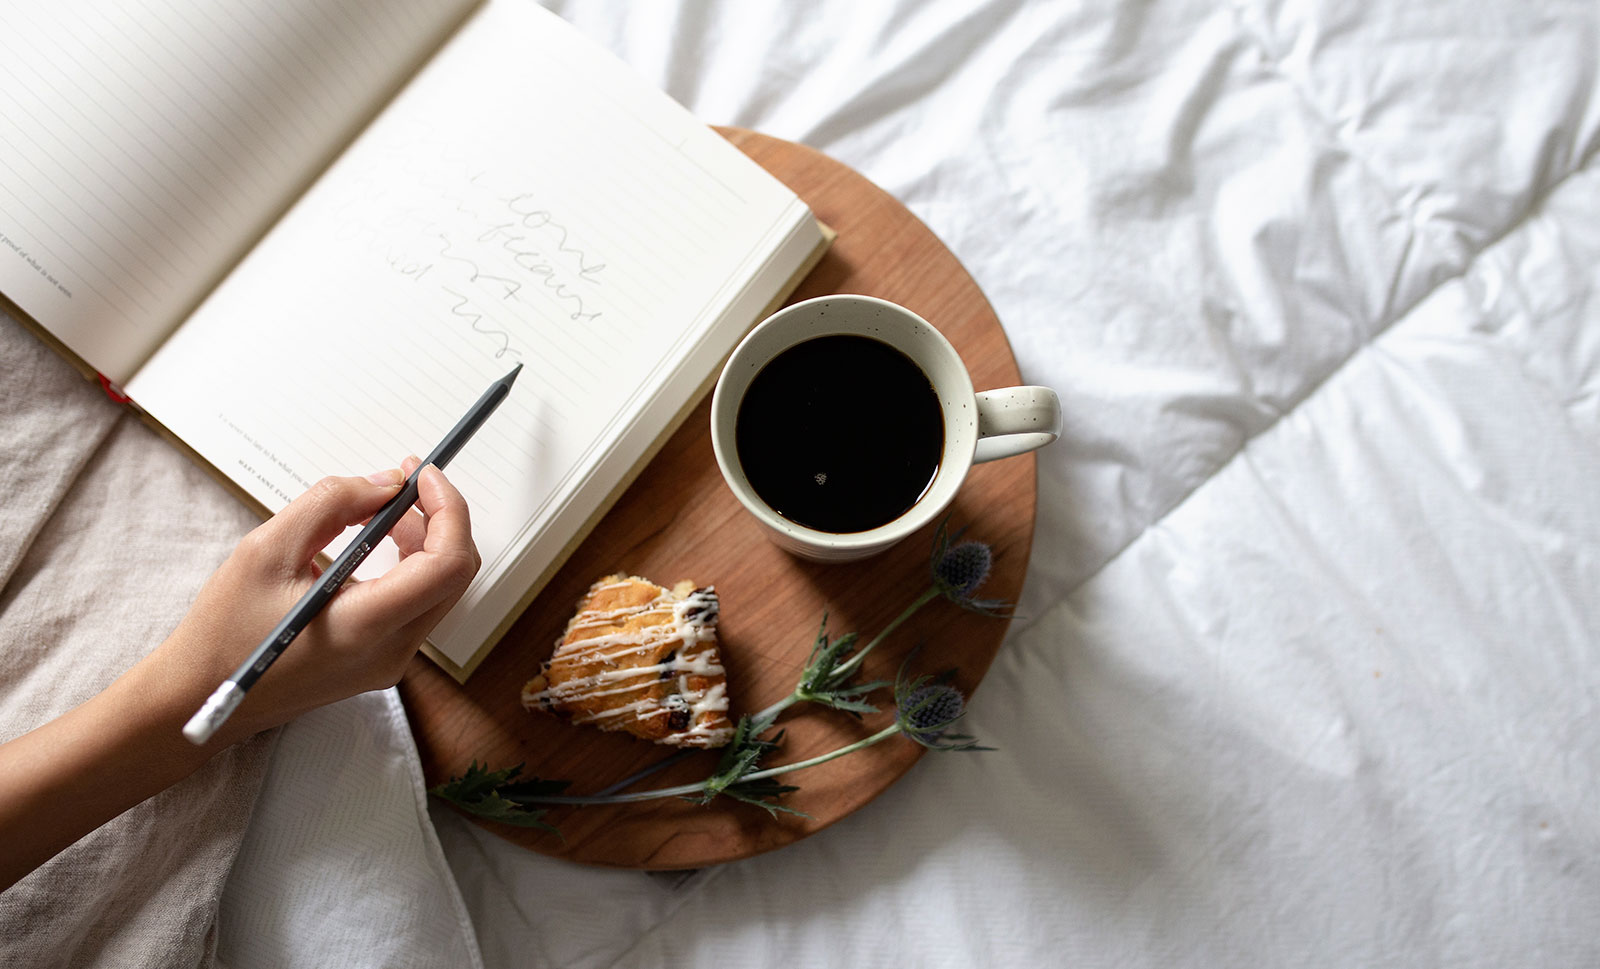 An open journal next to a cup of coffee and pastry